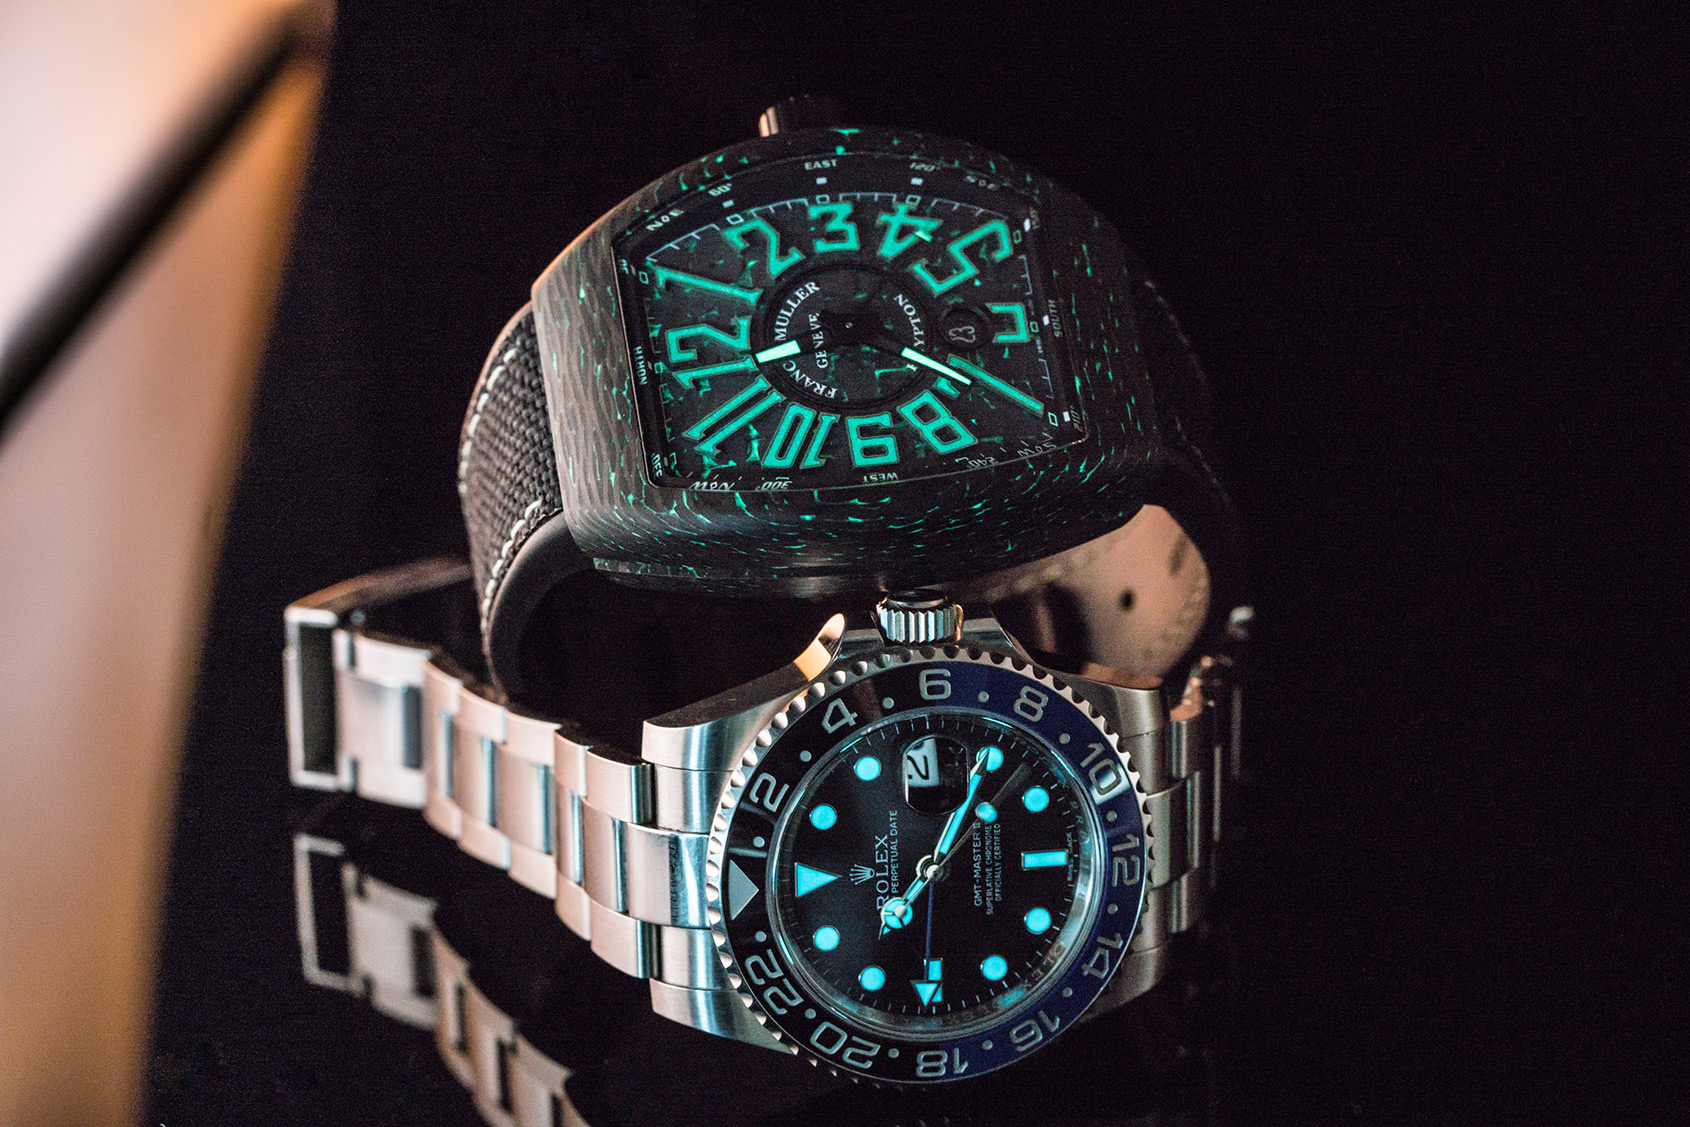 HANDS-ON: Replica Batman (Rolex’s BLNR) v Superman (Franck Muller’s Vanguard Carbon Krypton), in ‘The Lume Wars’ (way better than ‘Dawn of Justice’, we PROMISE)